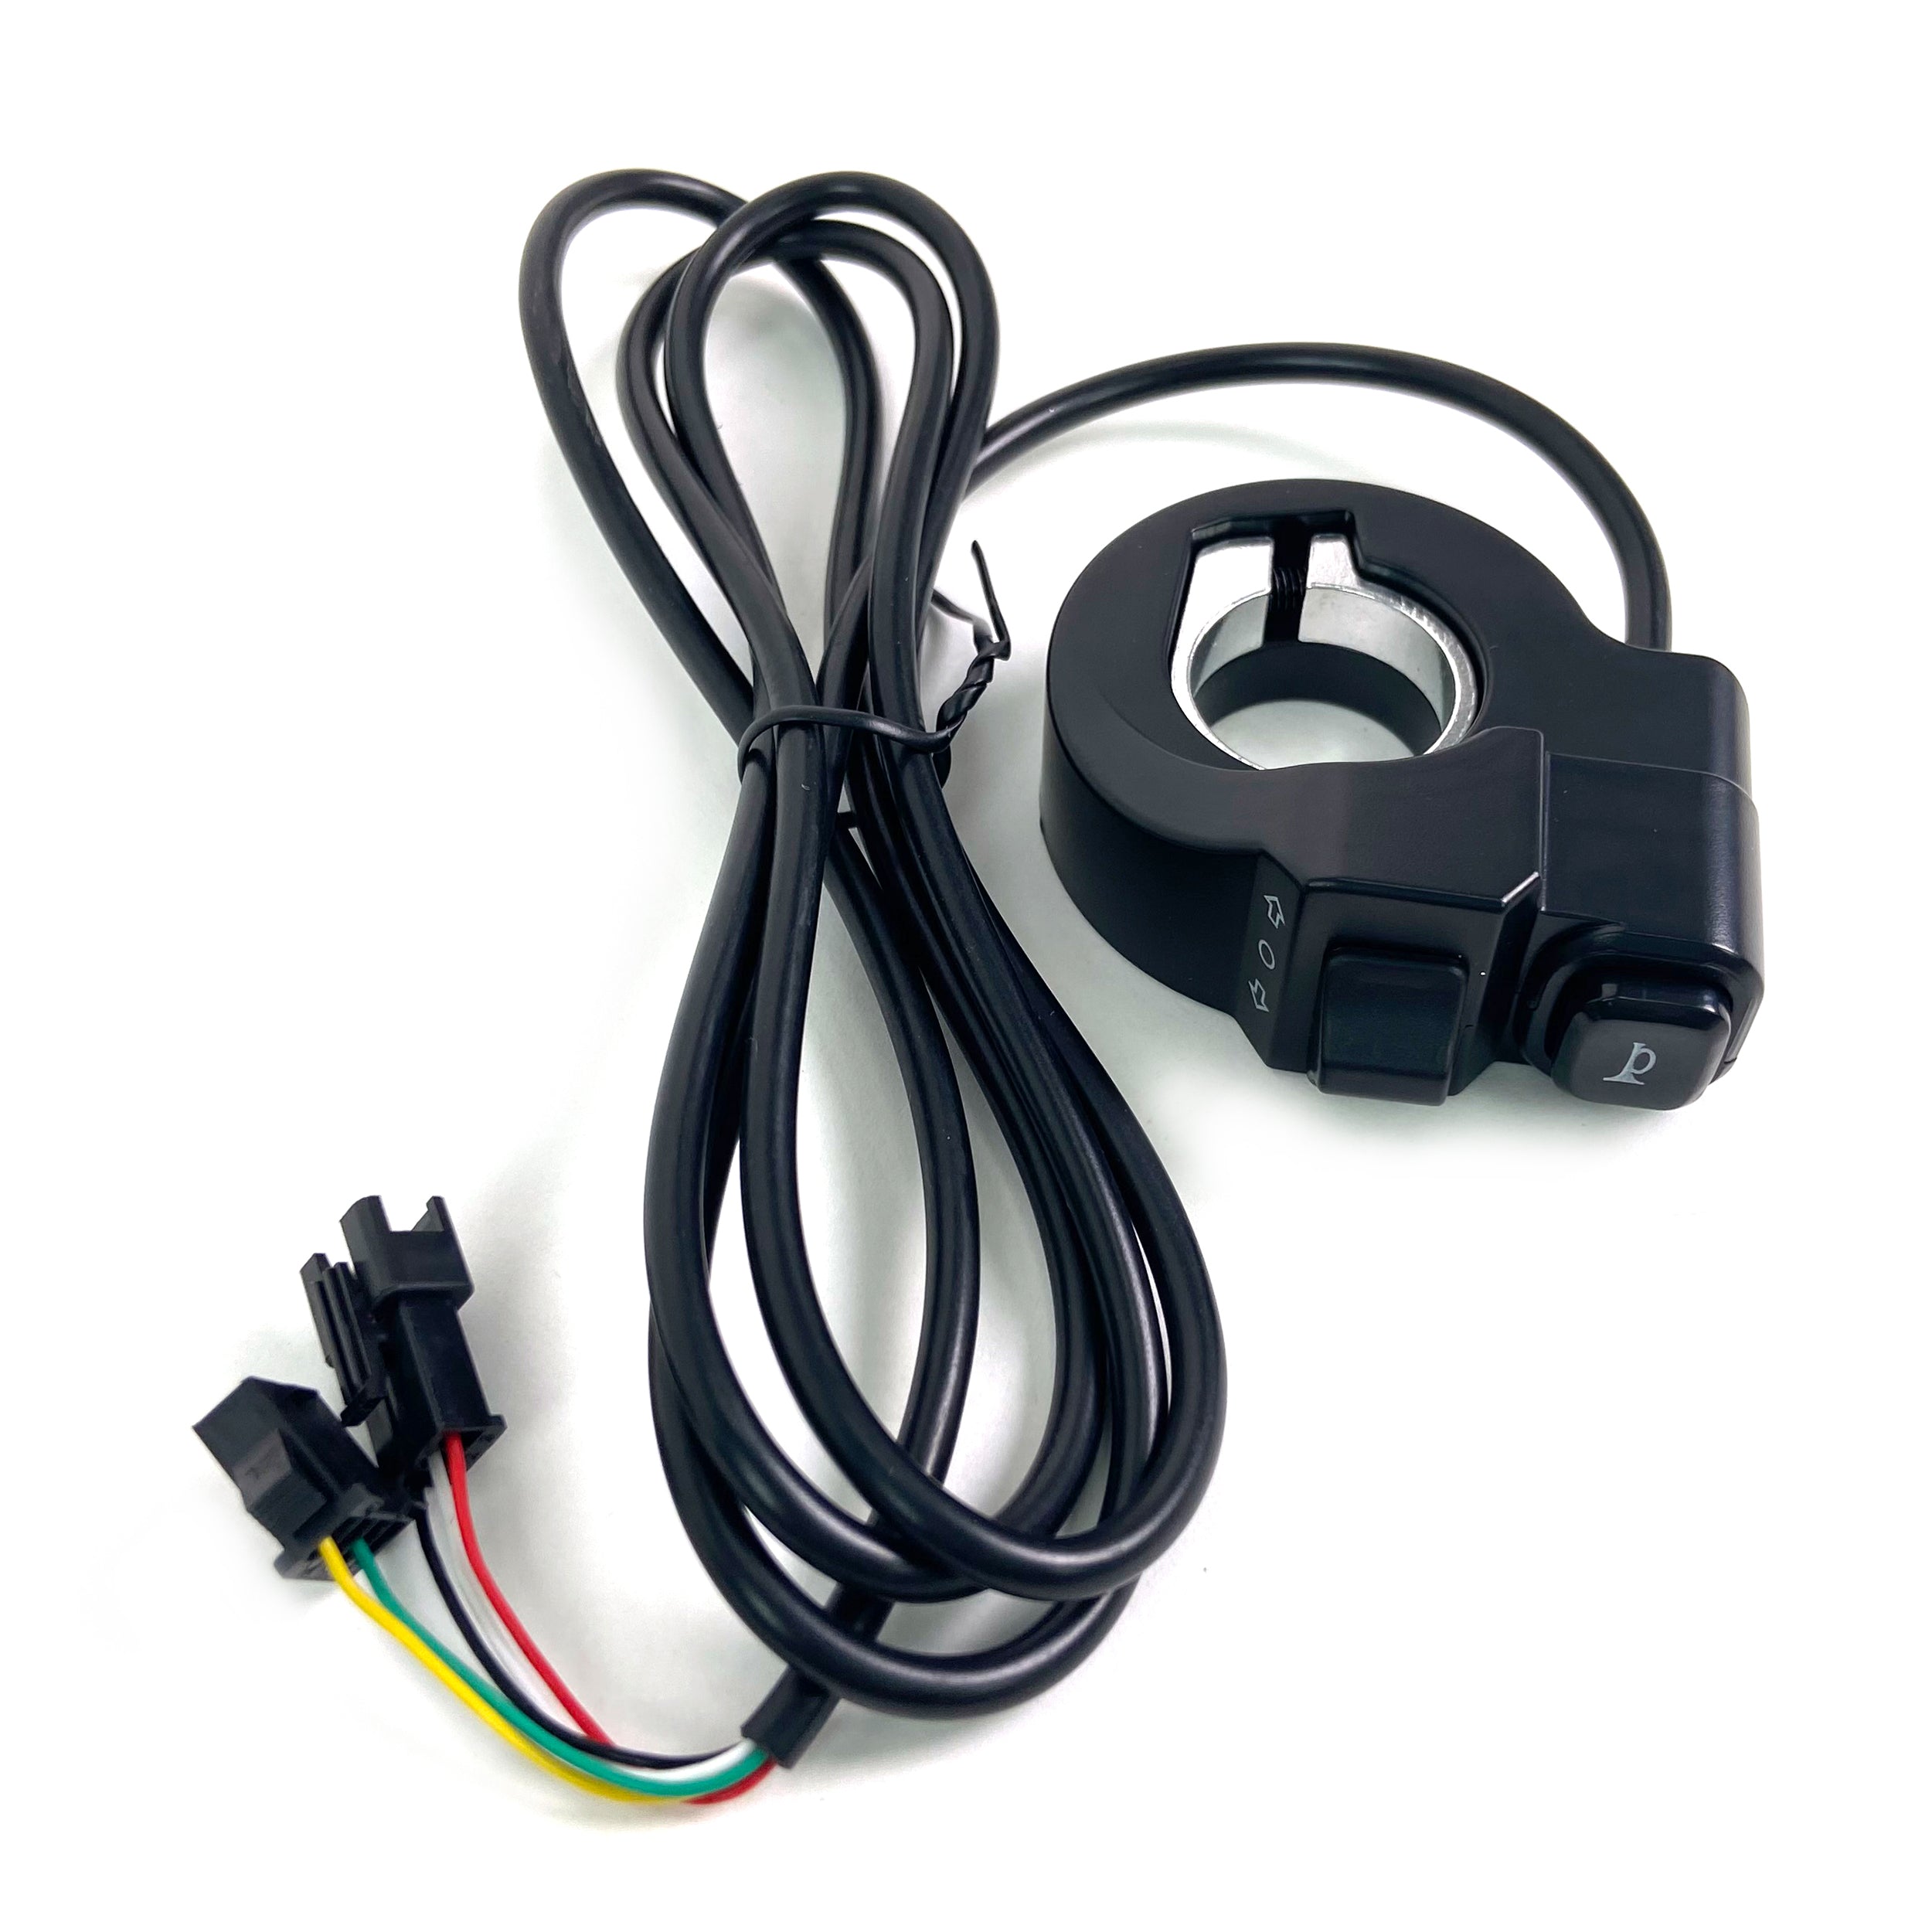 HORN AND TURN SIGNAL CONTROLLER